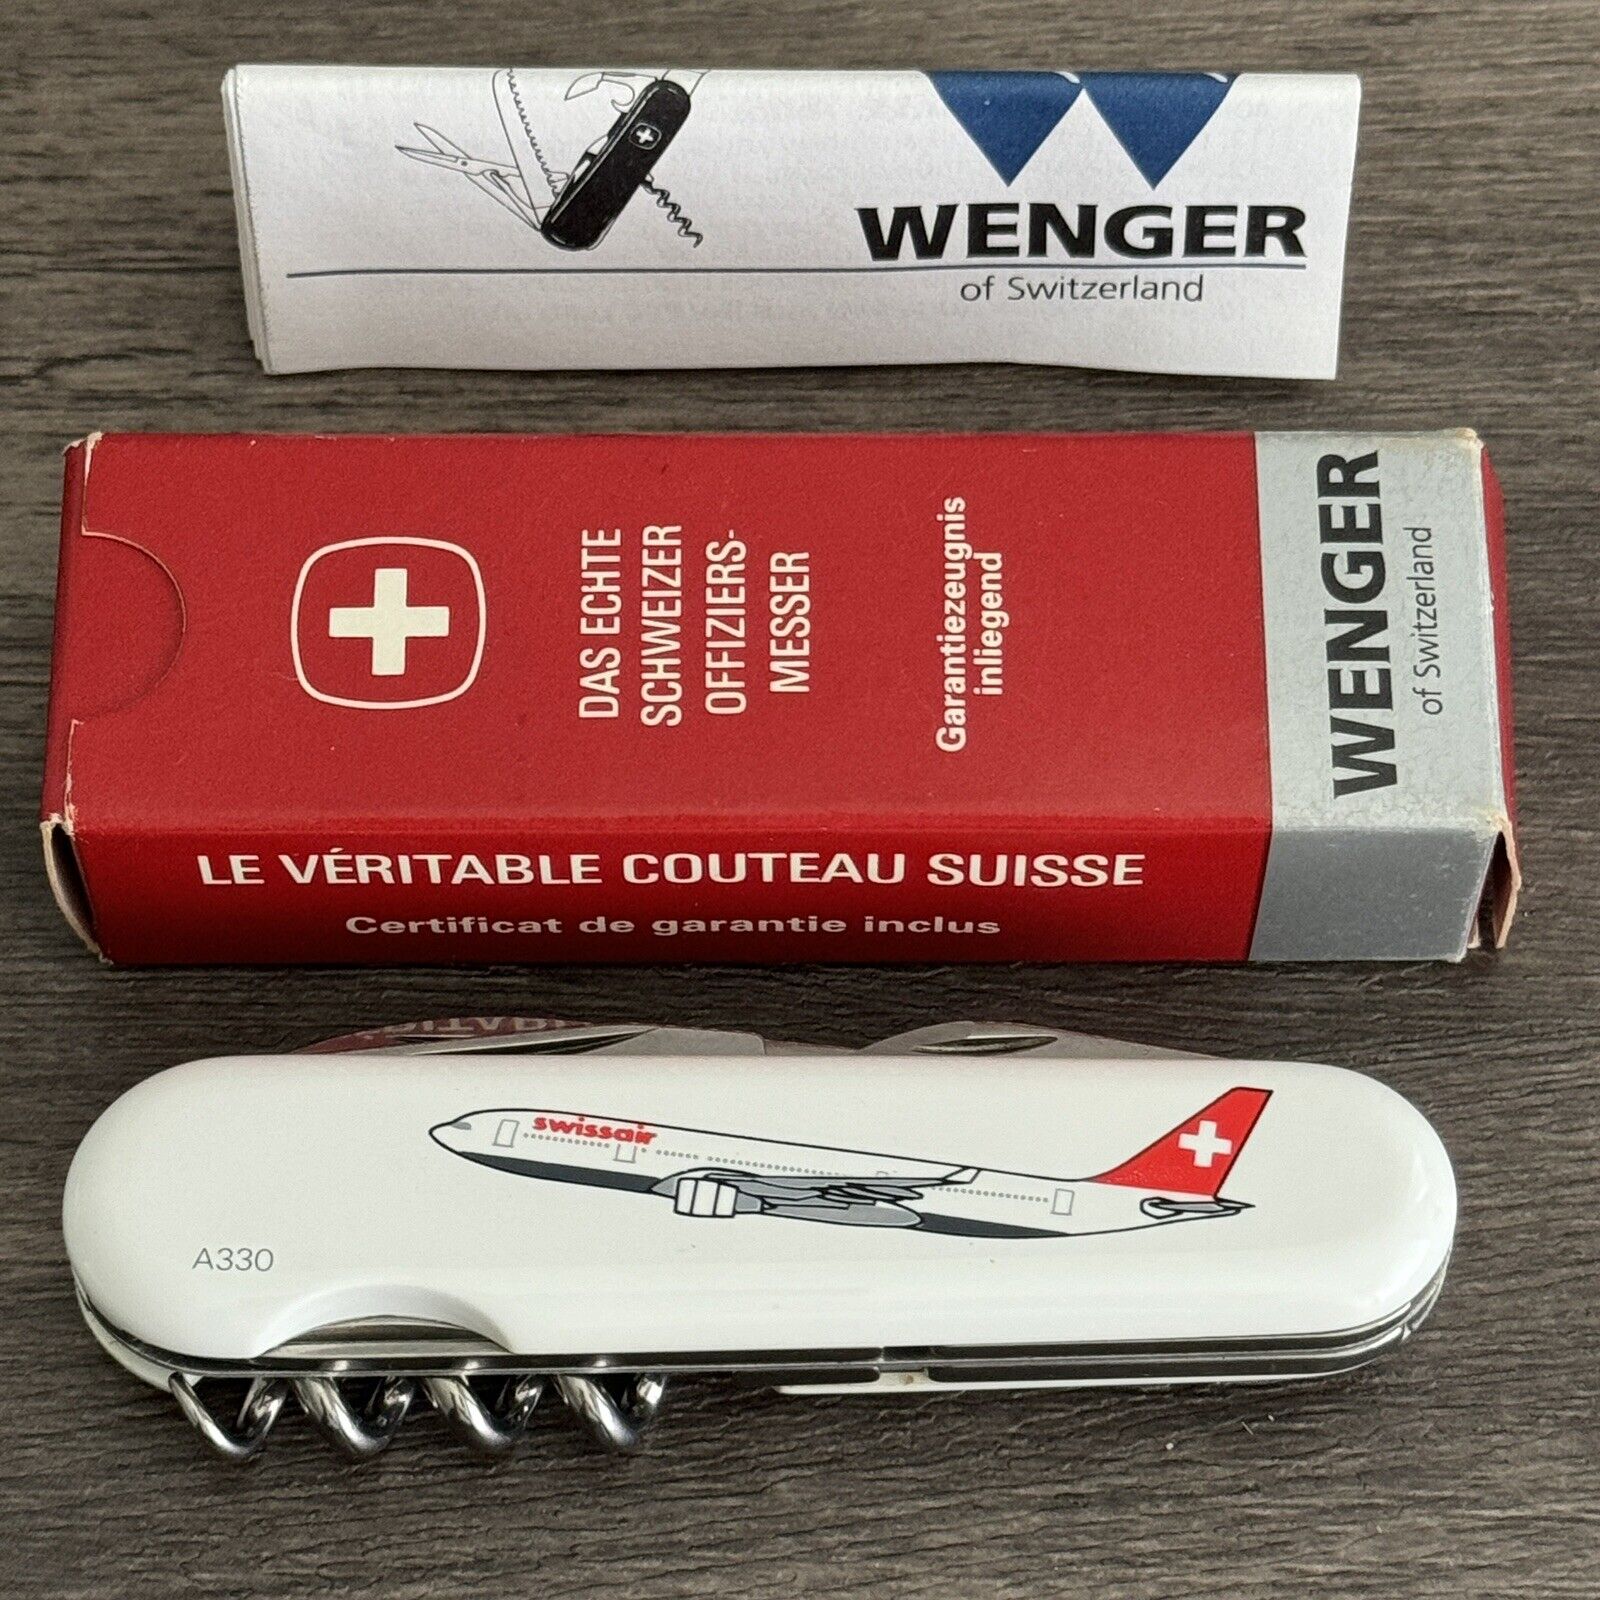 Wenger Swiss Army Knife Collectors Edition Airbus A330 Wenger Swiss Air Airplane